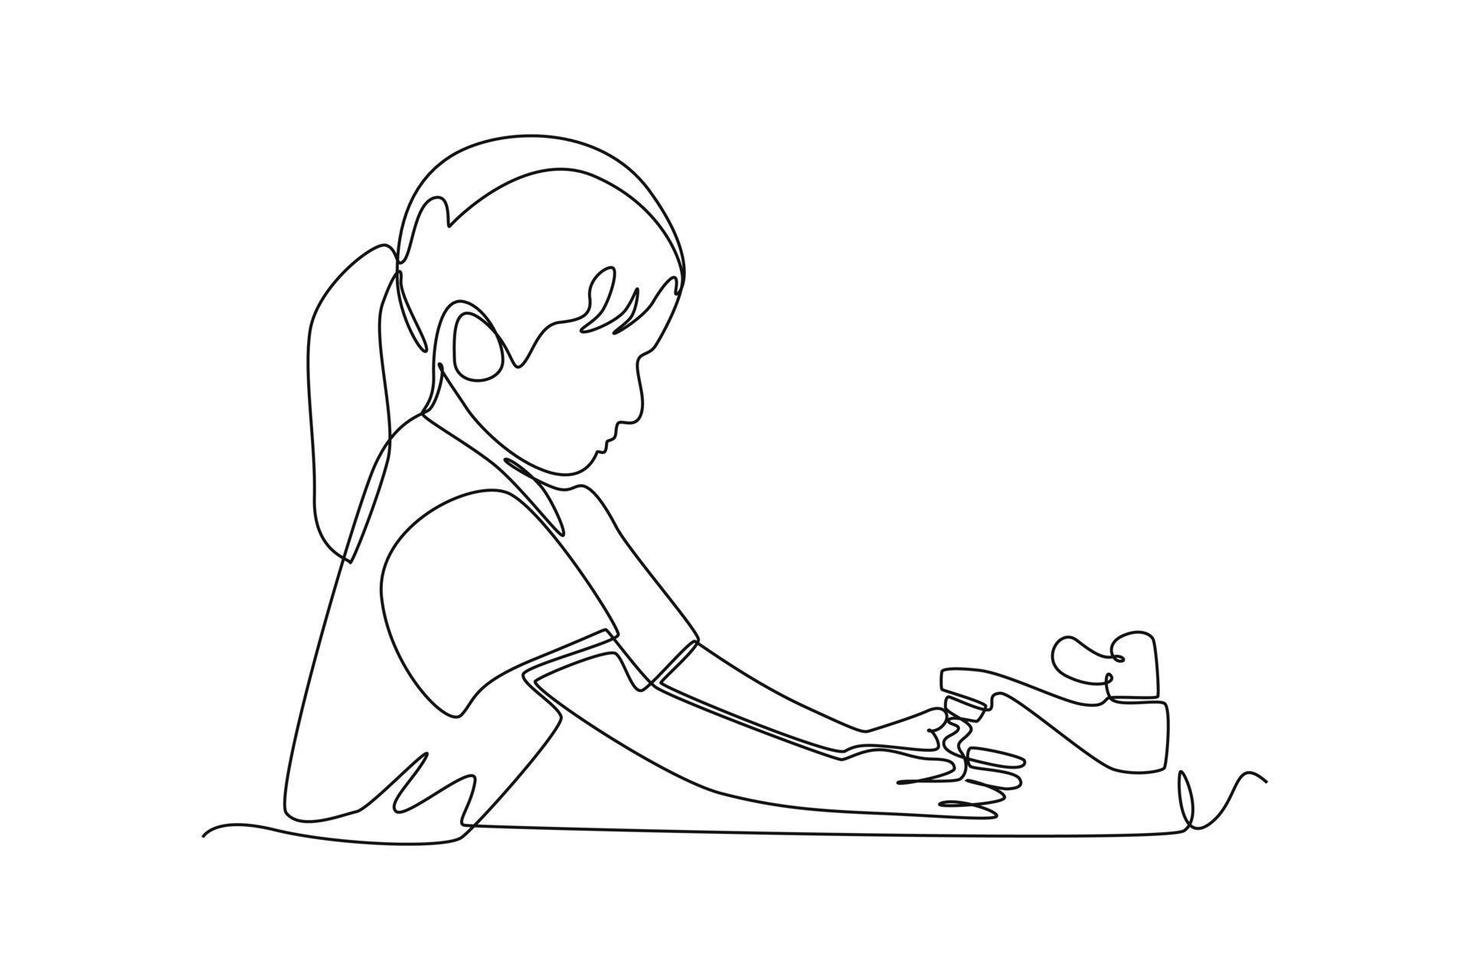 Single one line drawing happy cute little kid girl wash hand in sink. Healthcare at school concept. Continuous line draw design graphic vector illustration.